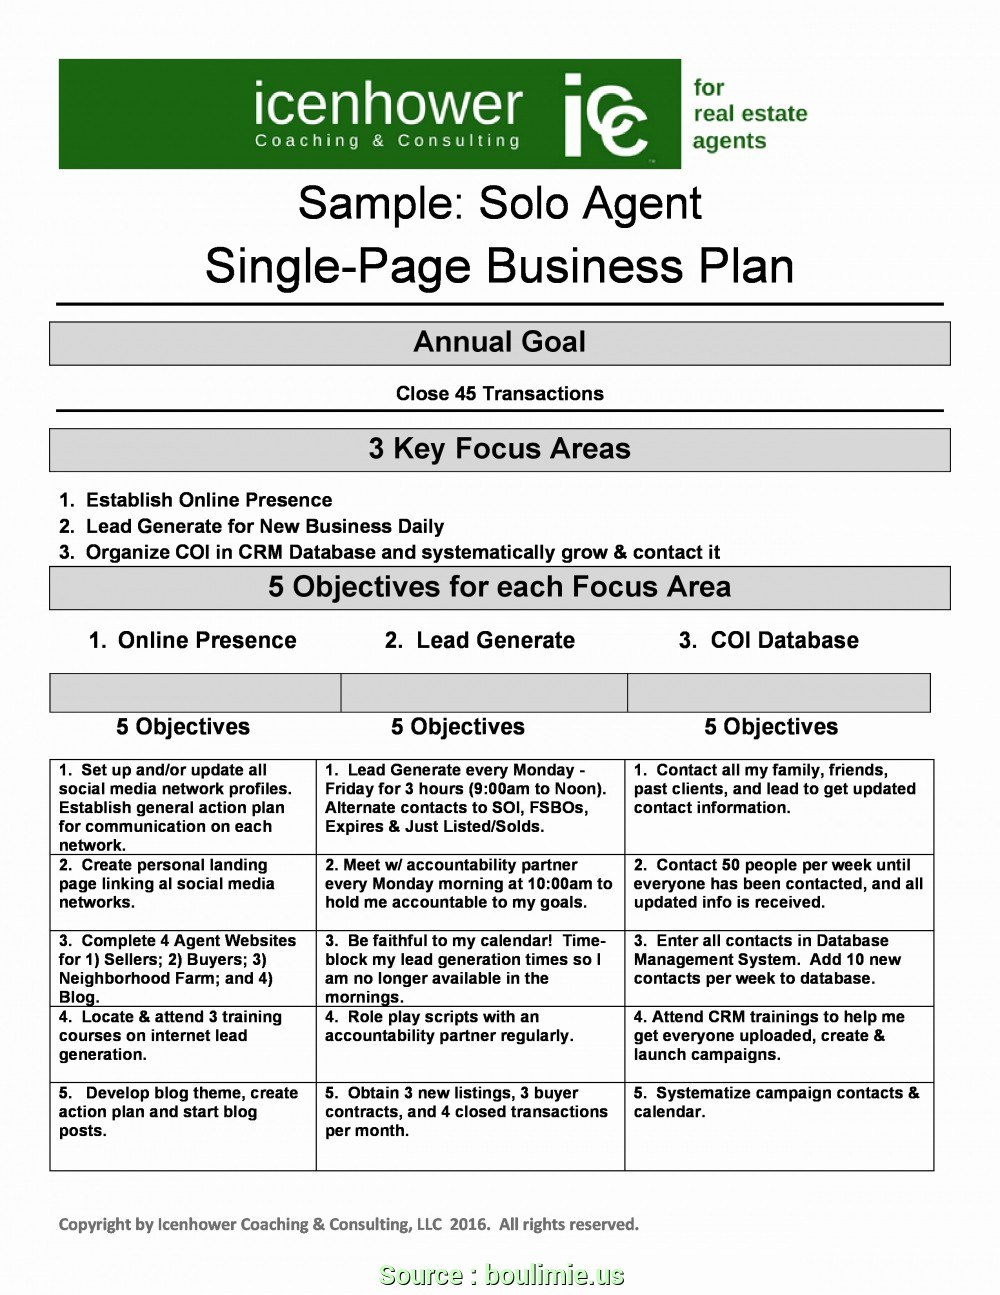 How To Write Business Plan For Real Estate Investment Most Sample within Real Estate Investment Partnership Business Plan Template